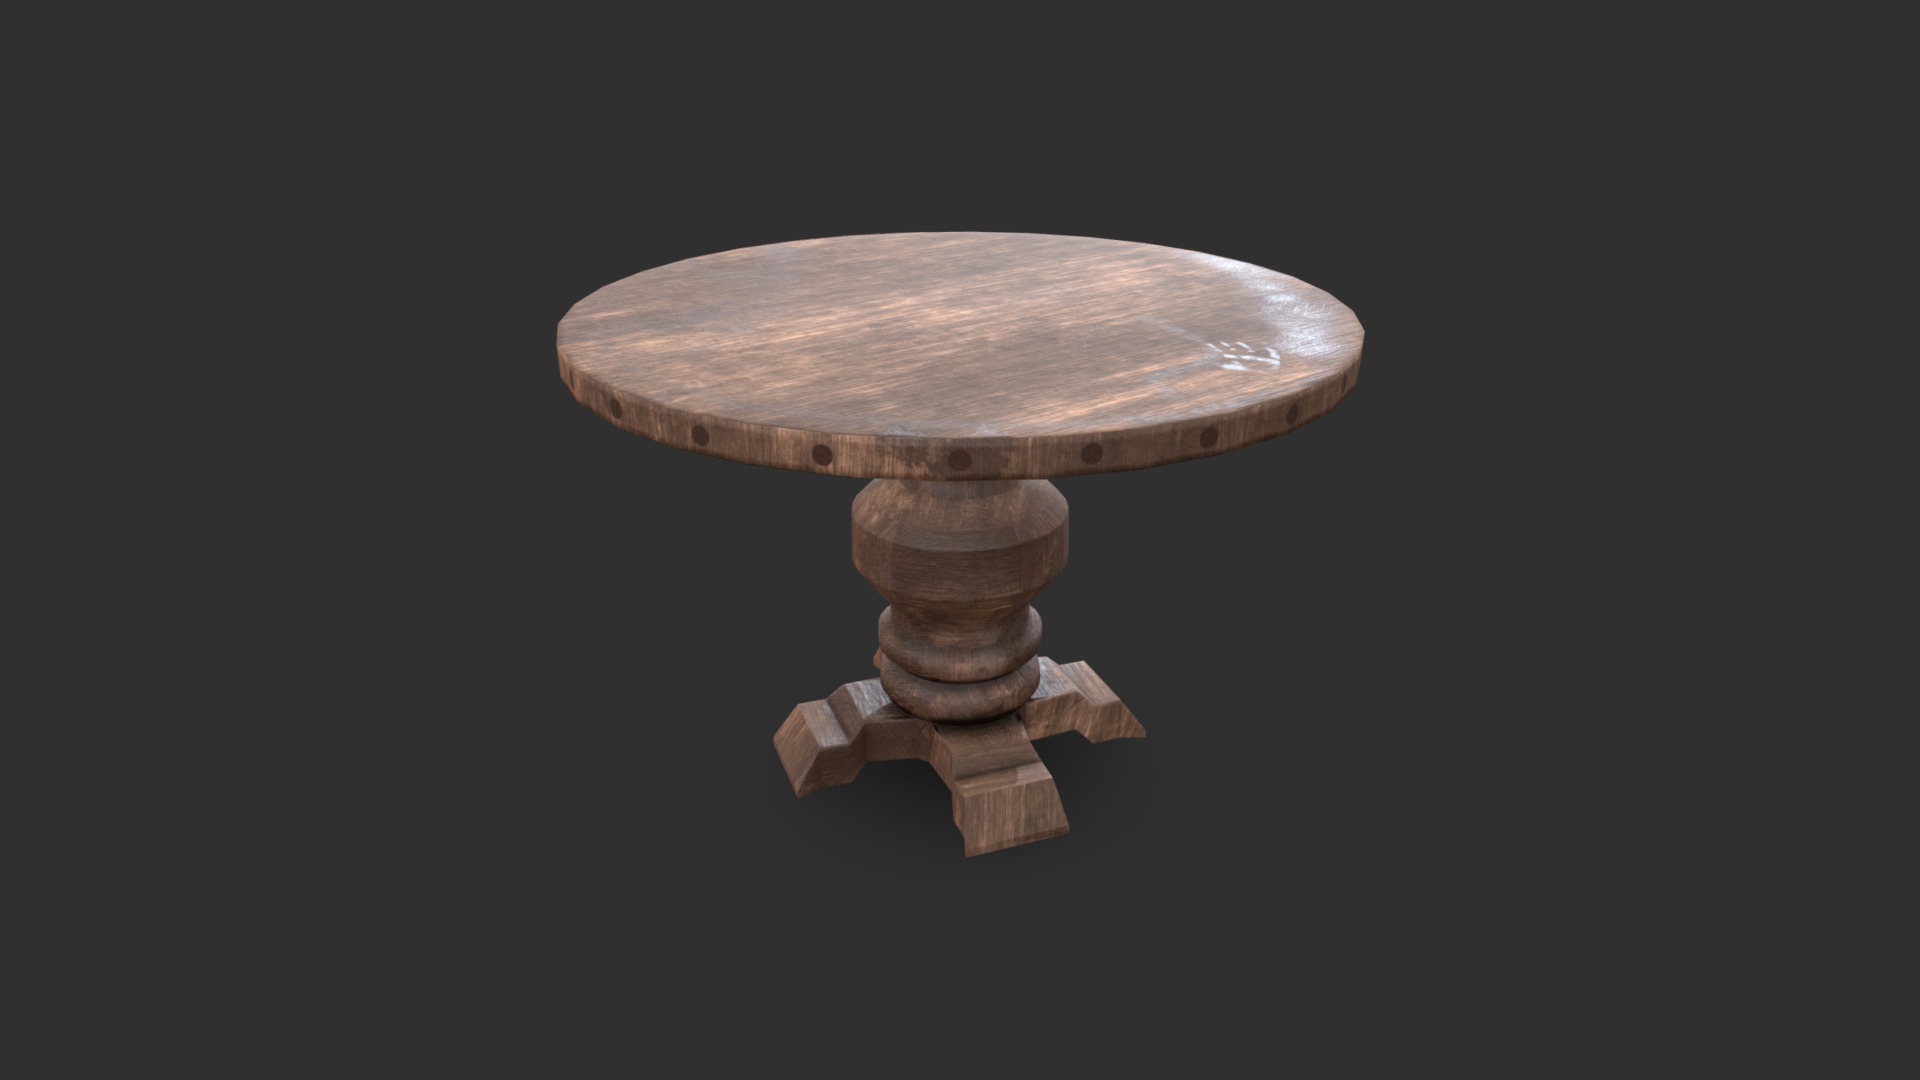 3D model Western table - This is a 3D model of the Western table. The 3D model is about a wooden table with a top.